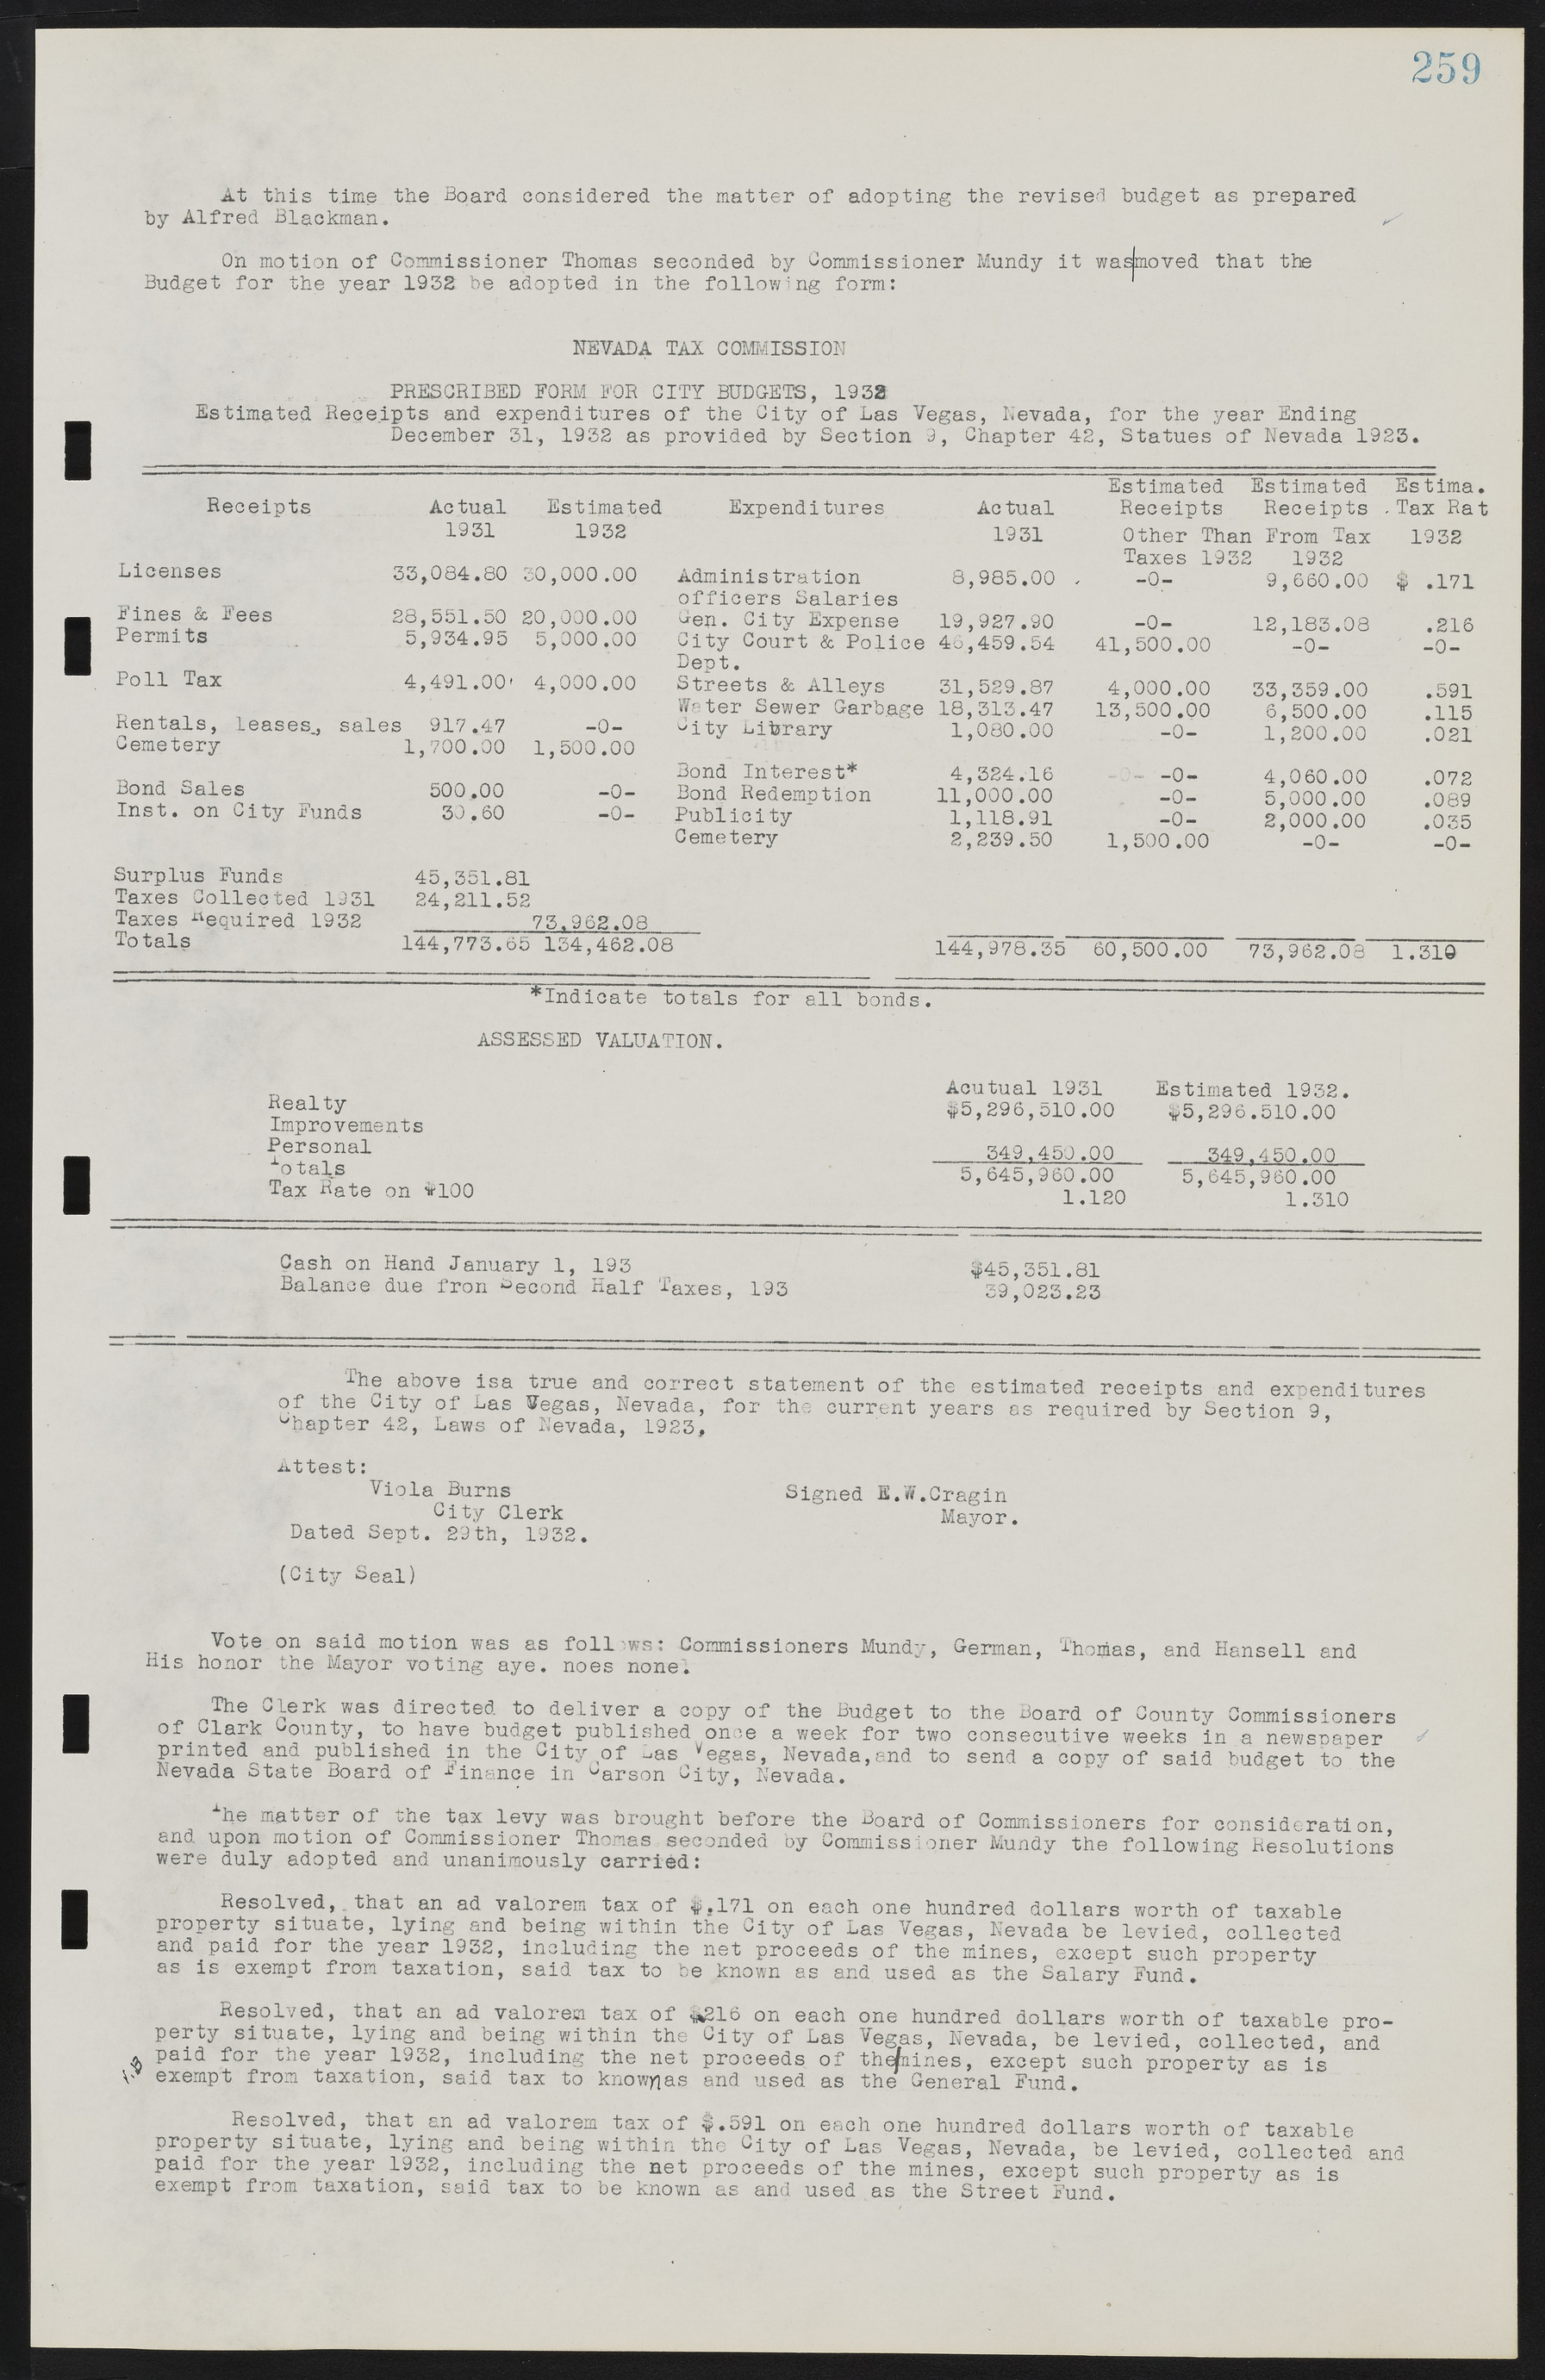 Las Vegas City Commission Minutes, May 14, 1929 to February 11, 1937, lvc000003-265